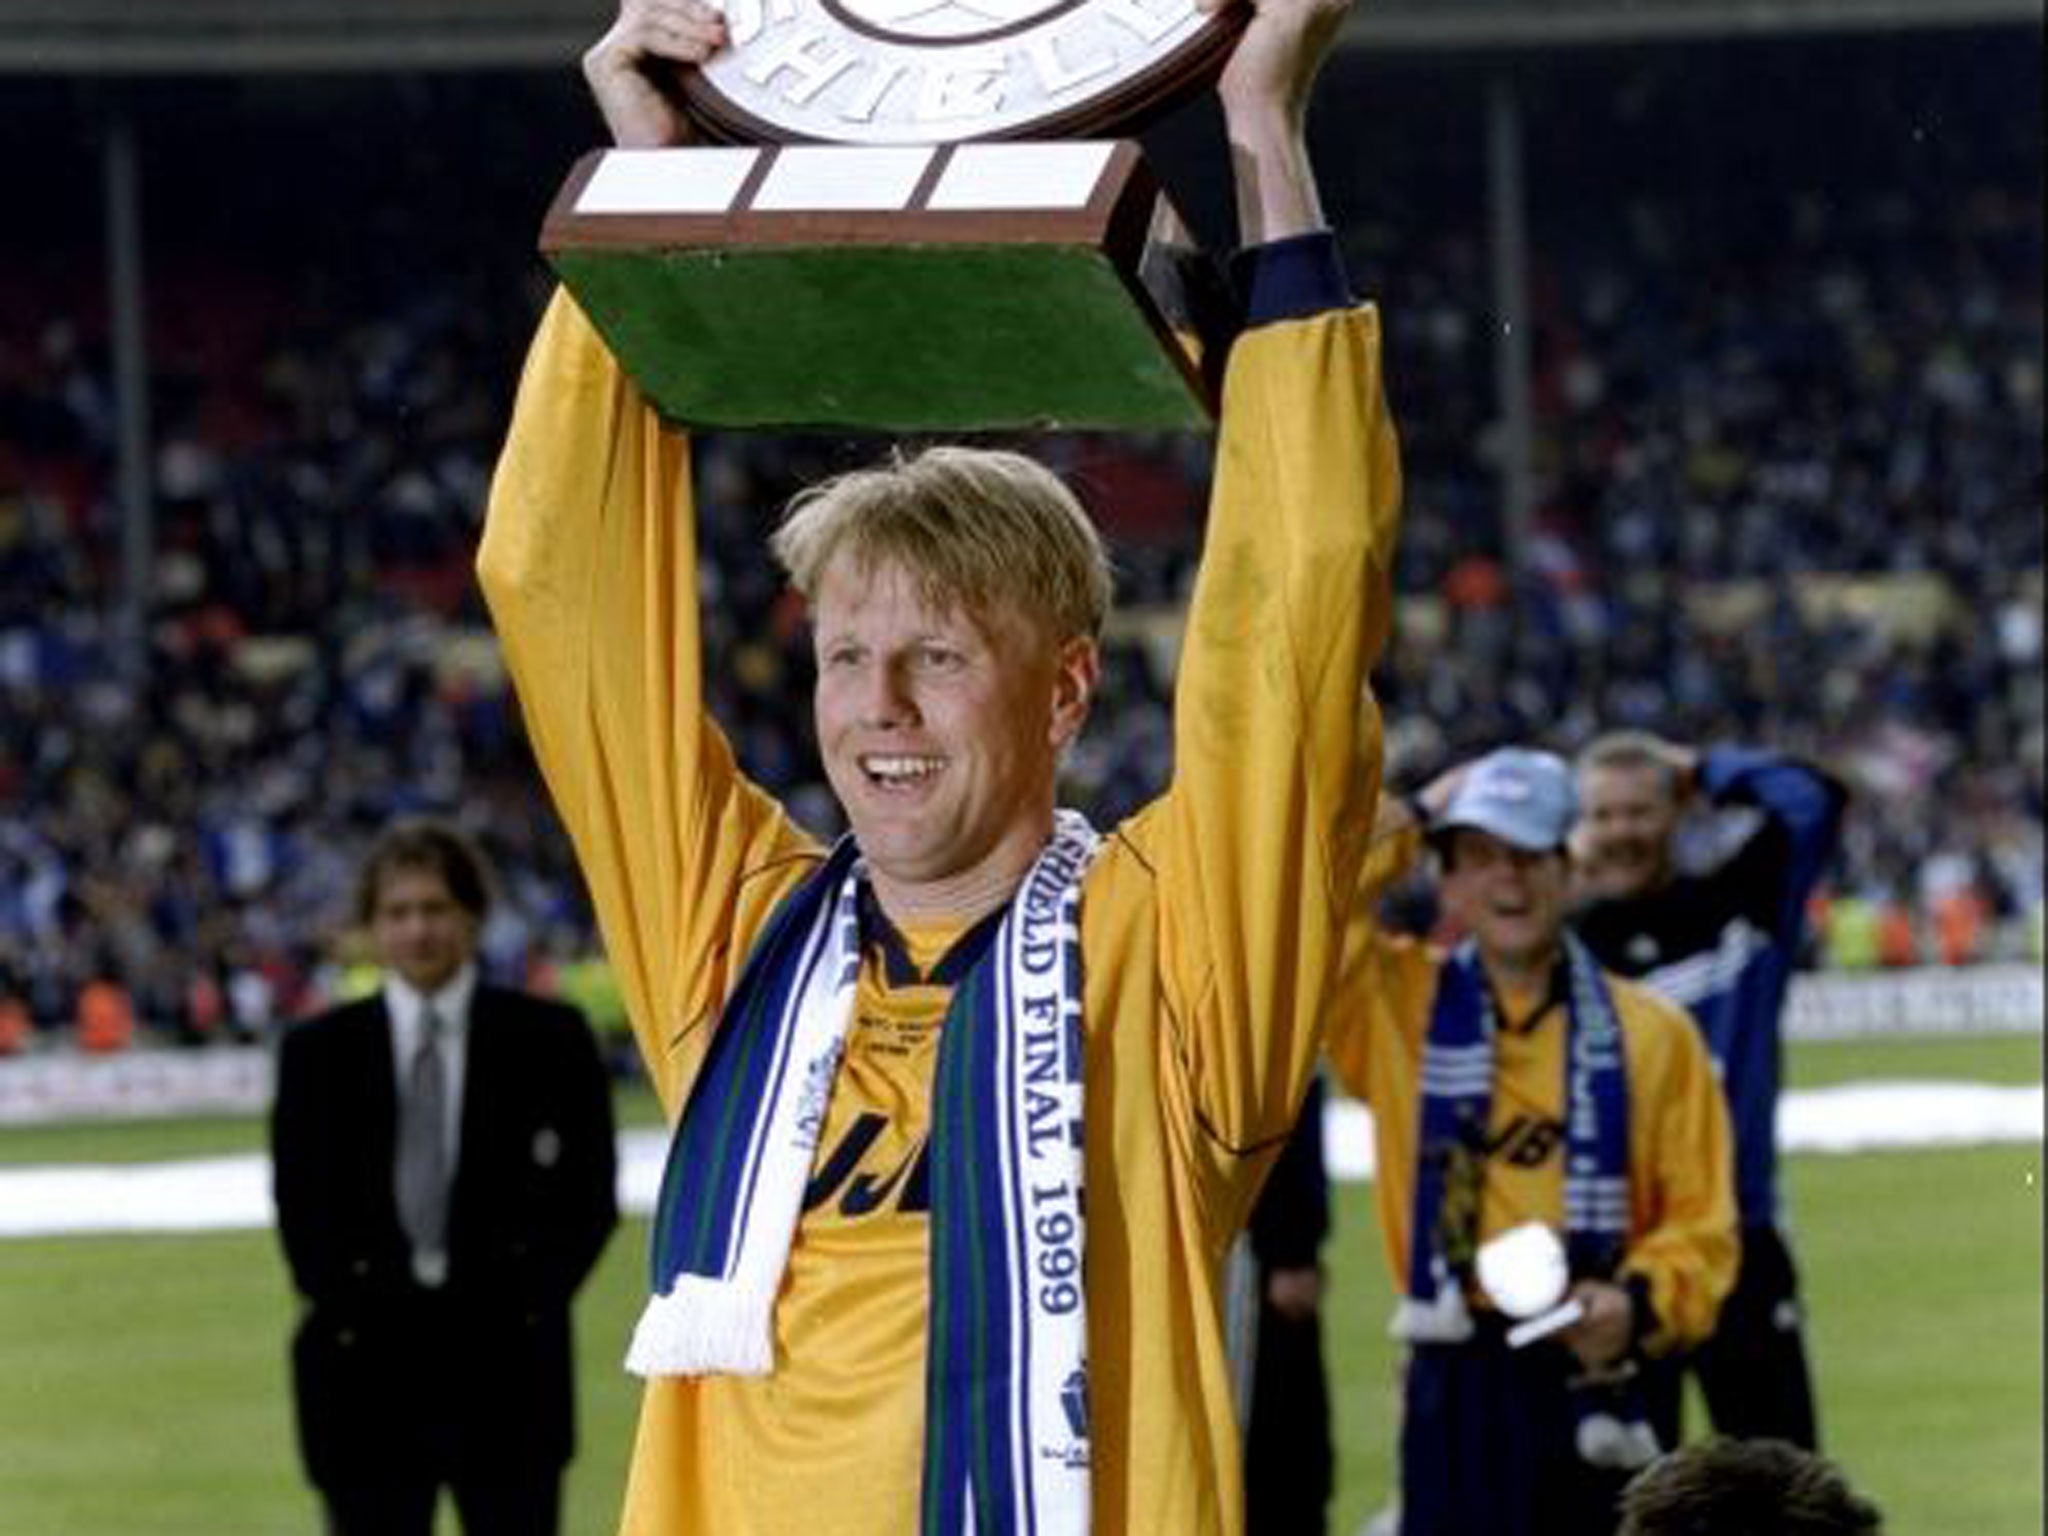 Paul Rogers parades the trophy in 1999